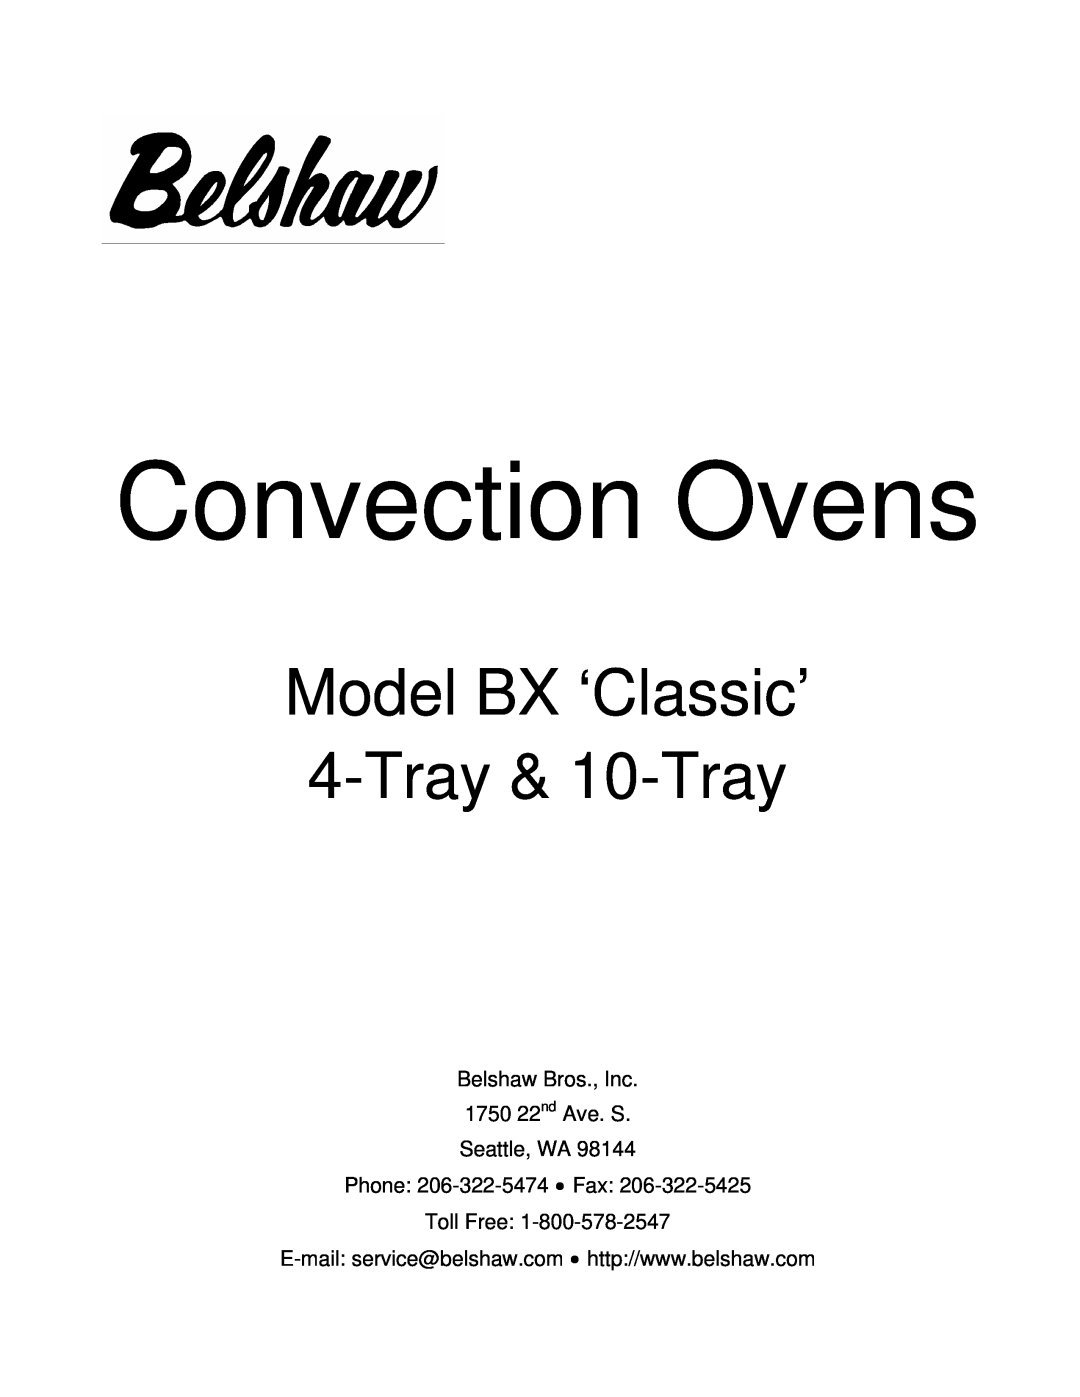 Belshaw Brothers BX Classic manual Model BX ‘Classic’ 4-Tray& 10-Tray, Convection Ovens 